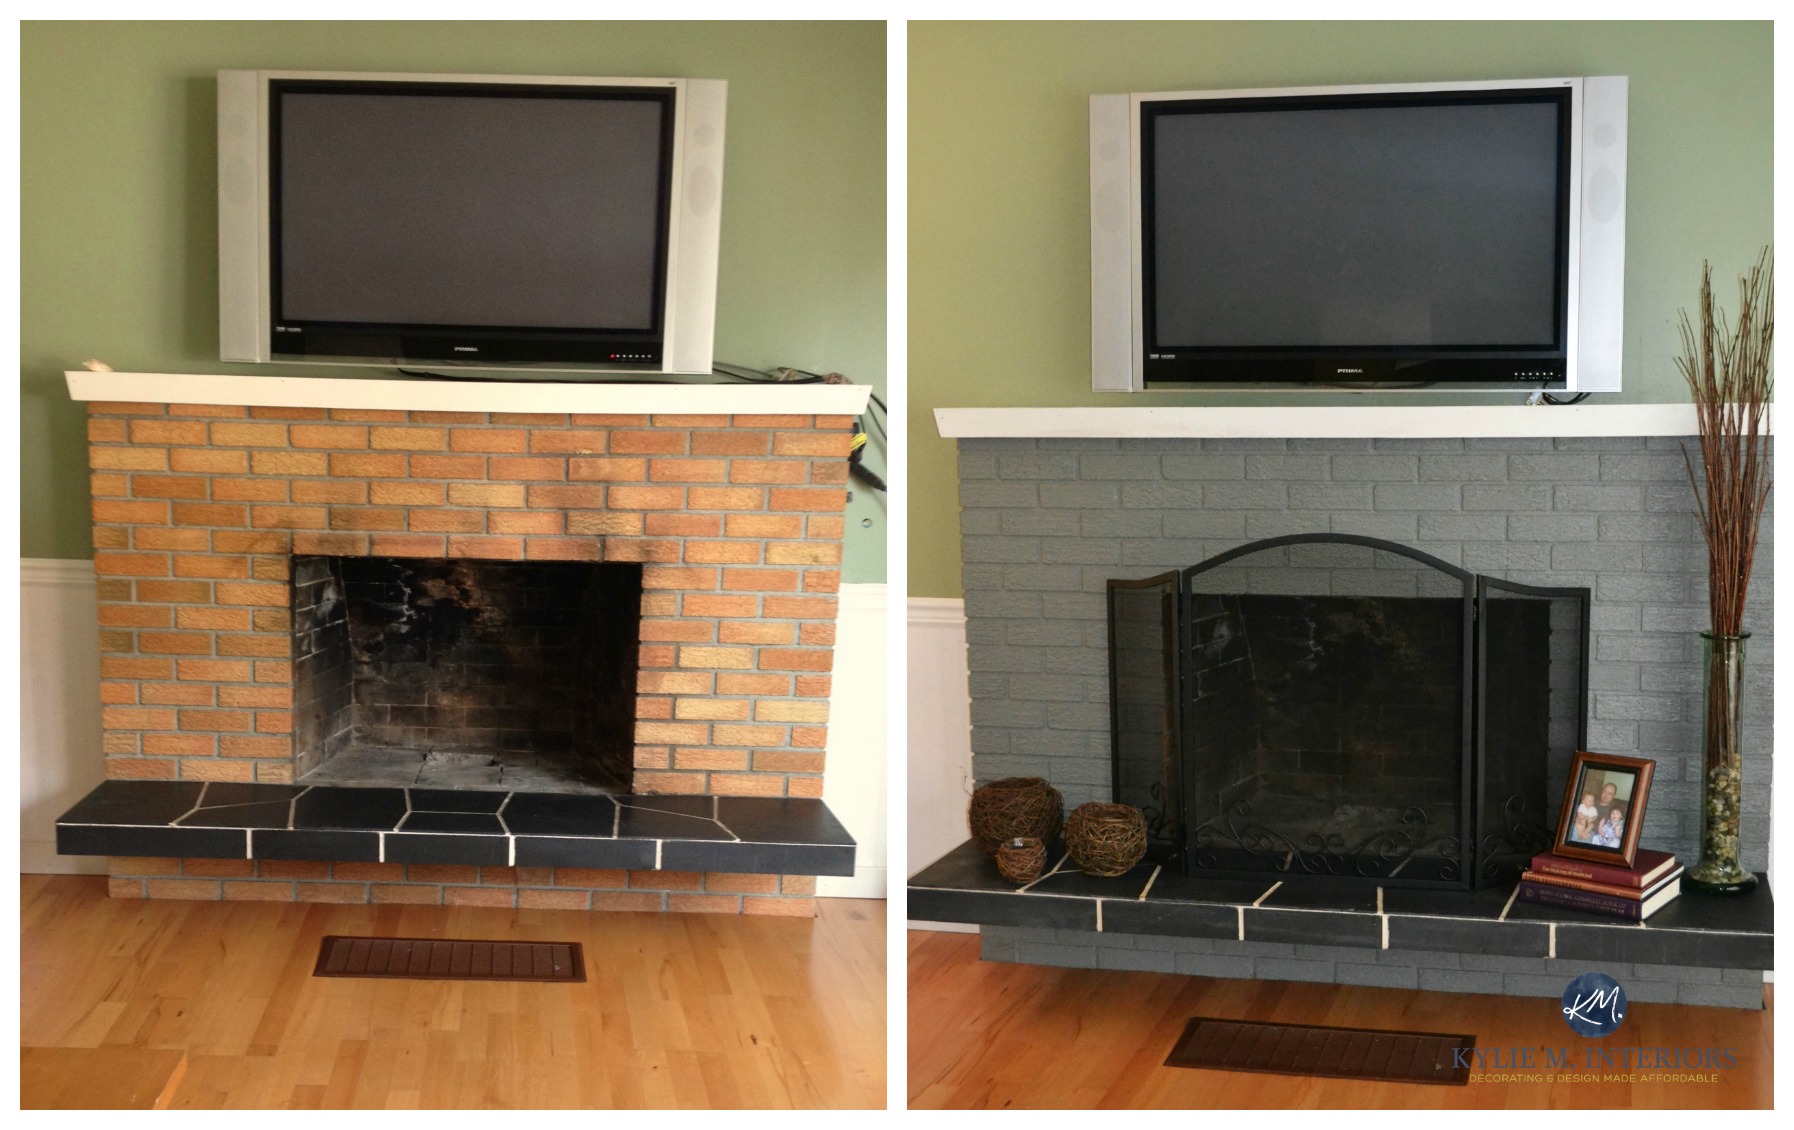 Fireplace thermopile Awesome How to Update A Fireplace Charming Fireplace